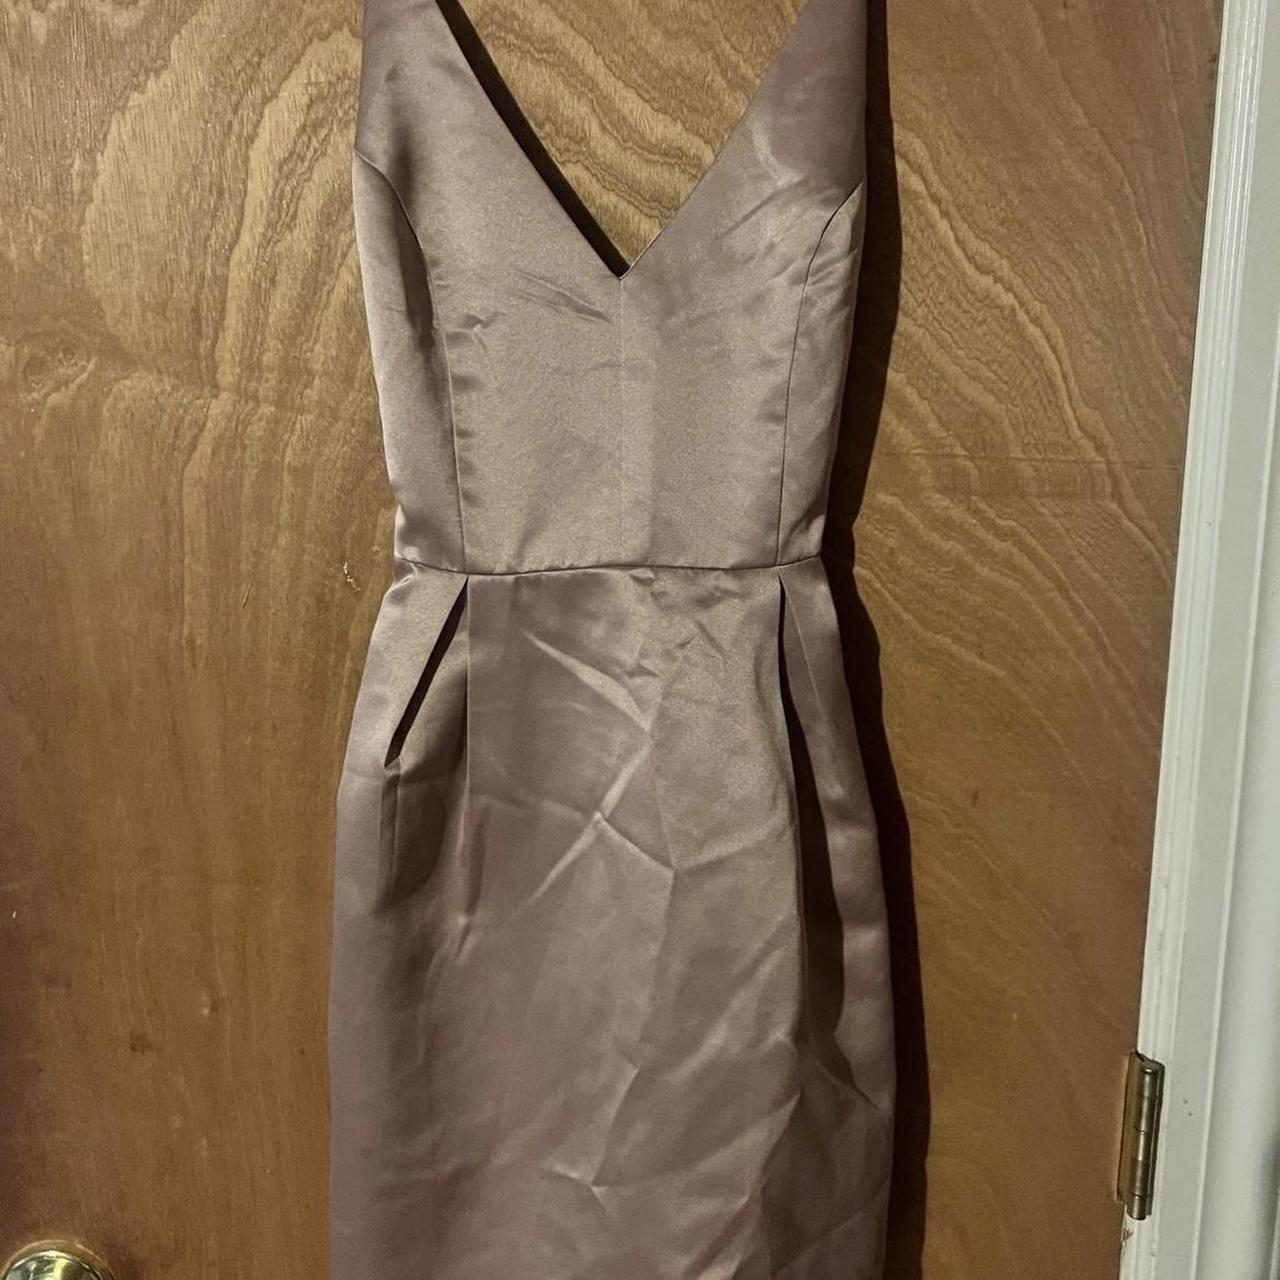 item listed by thriftgoddess444